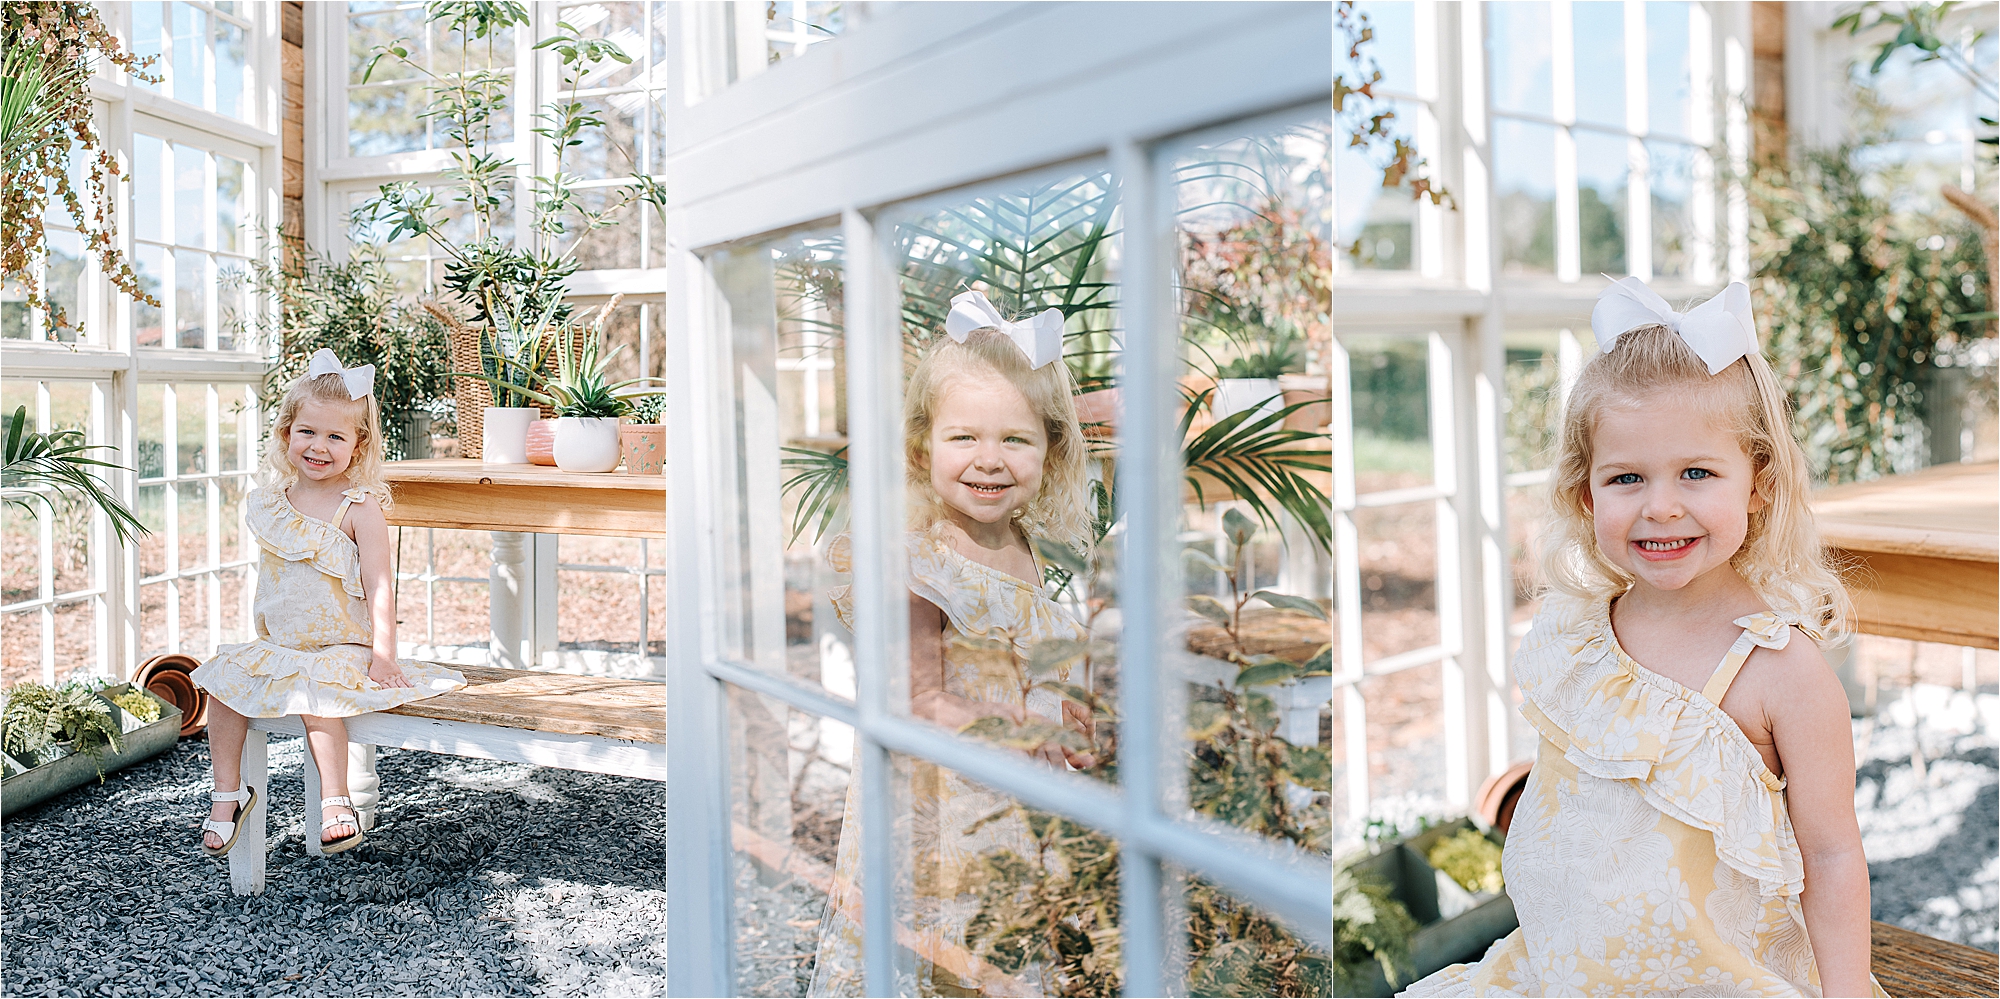 Lawrenceville greenhouse mommy & me session